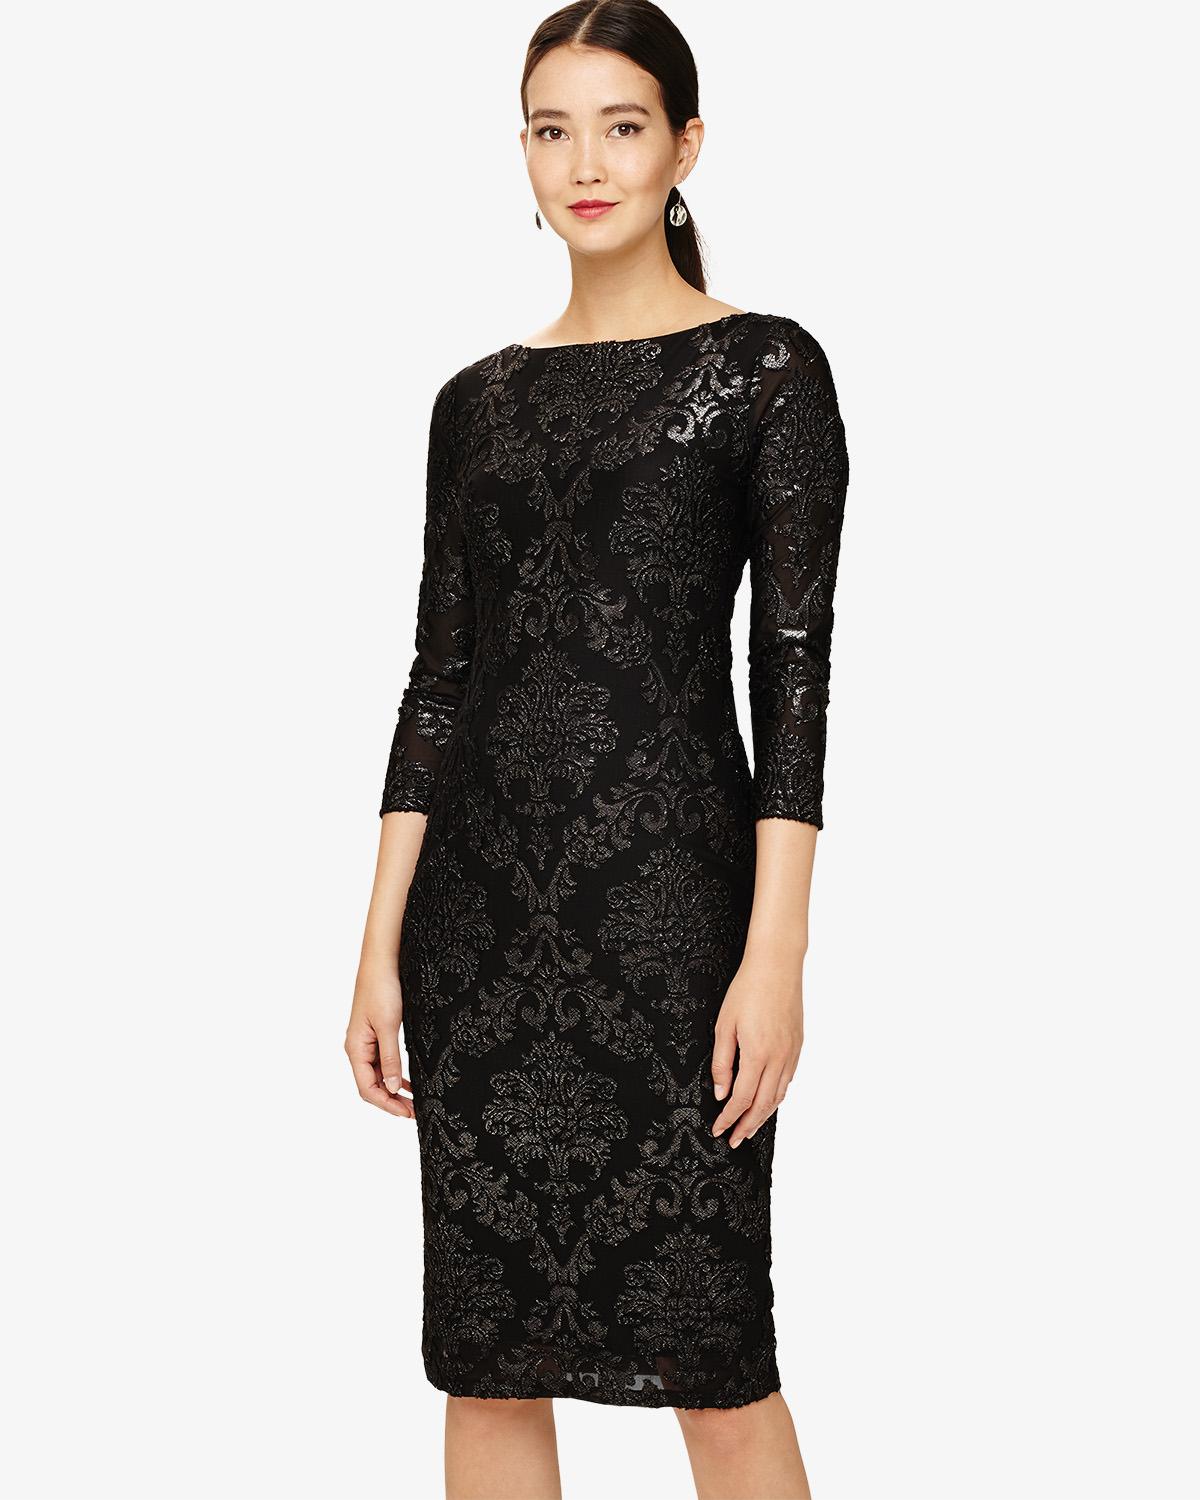 Lyst - Phase Eight Petra Burnout Dress in Black